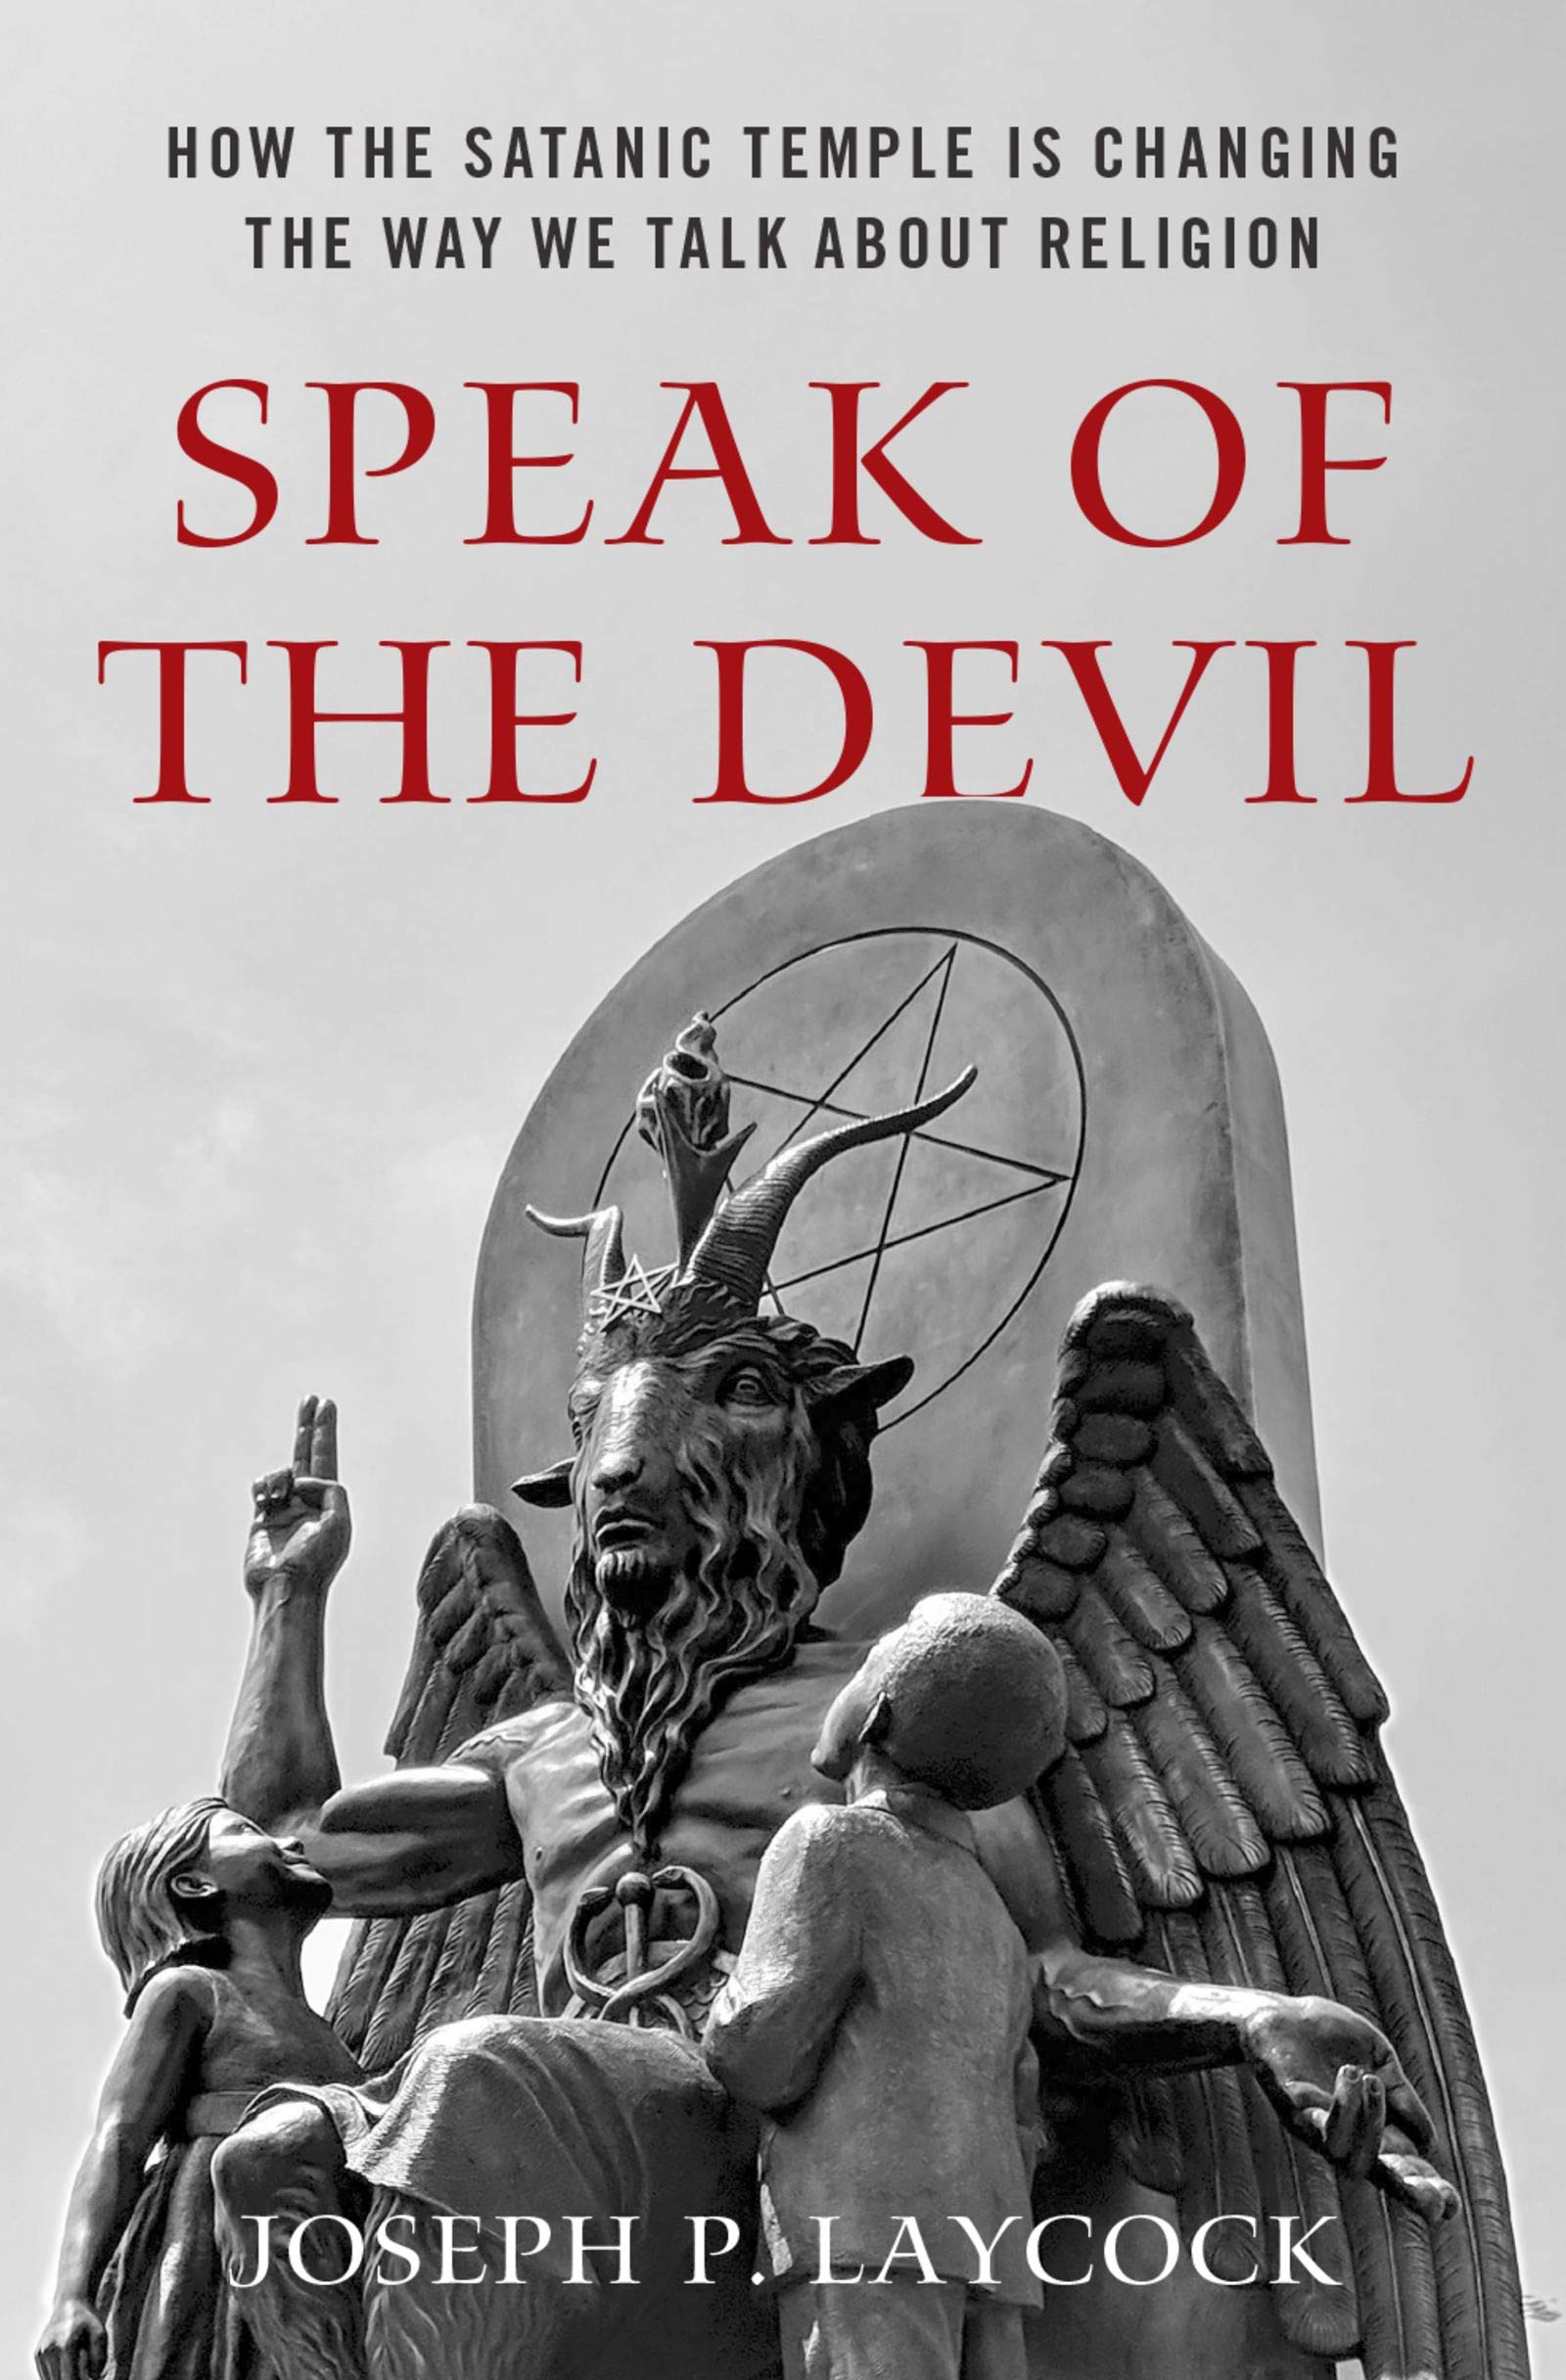 Speak of the Devil: How The Satanic Temple is Changing the Way We Talk about Religion by Joseph P. Laycock Hardcover Book